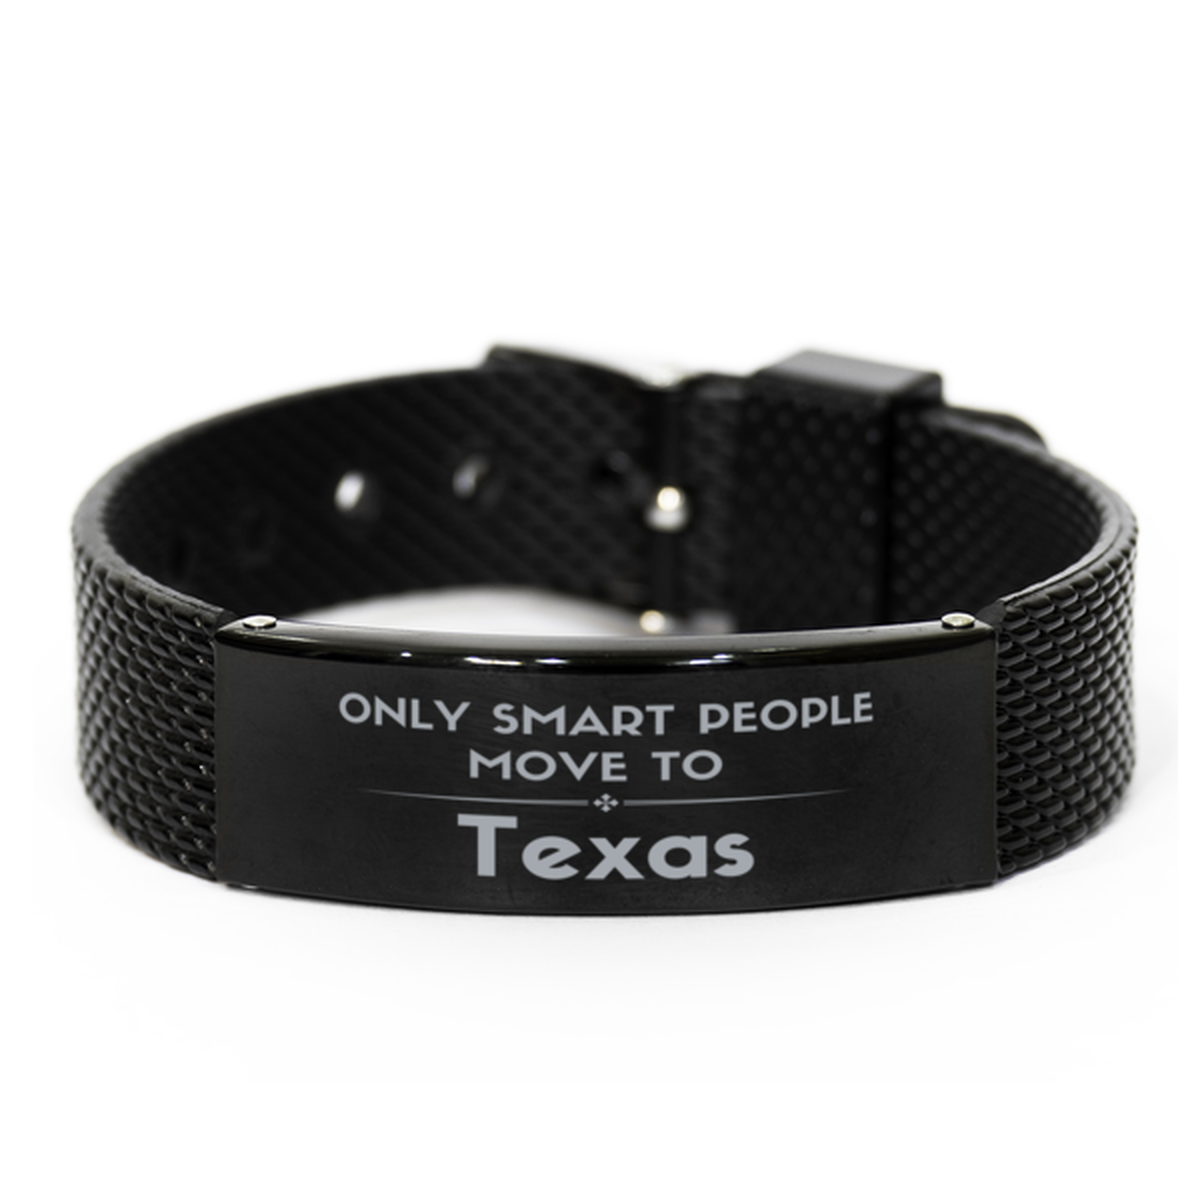 Only smart people move to Texas Black Shark Mesh Bracelet, Gag Gifts For Texas, Move to Texas Gifts for Friends Coworker Funny Saying Quote